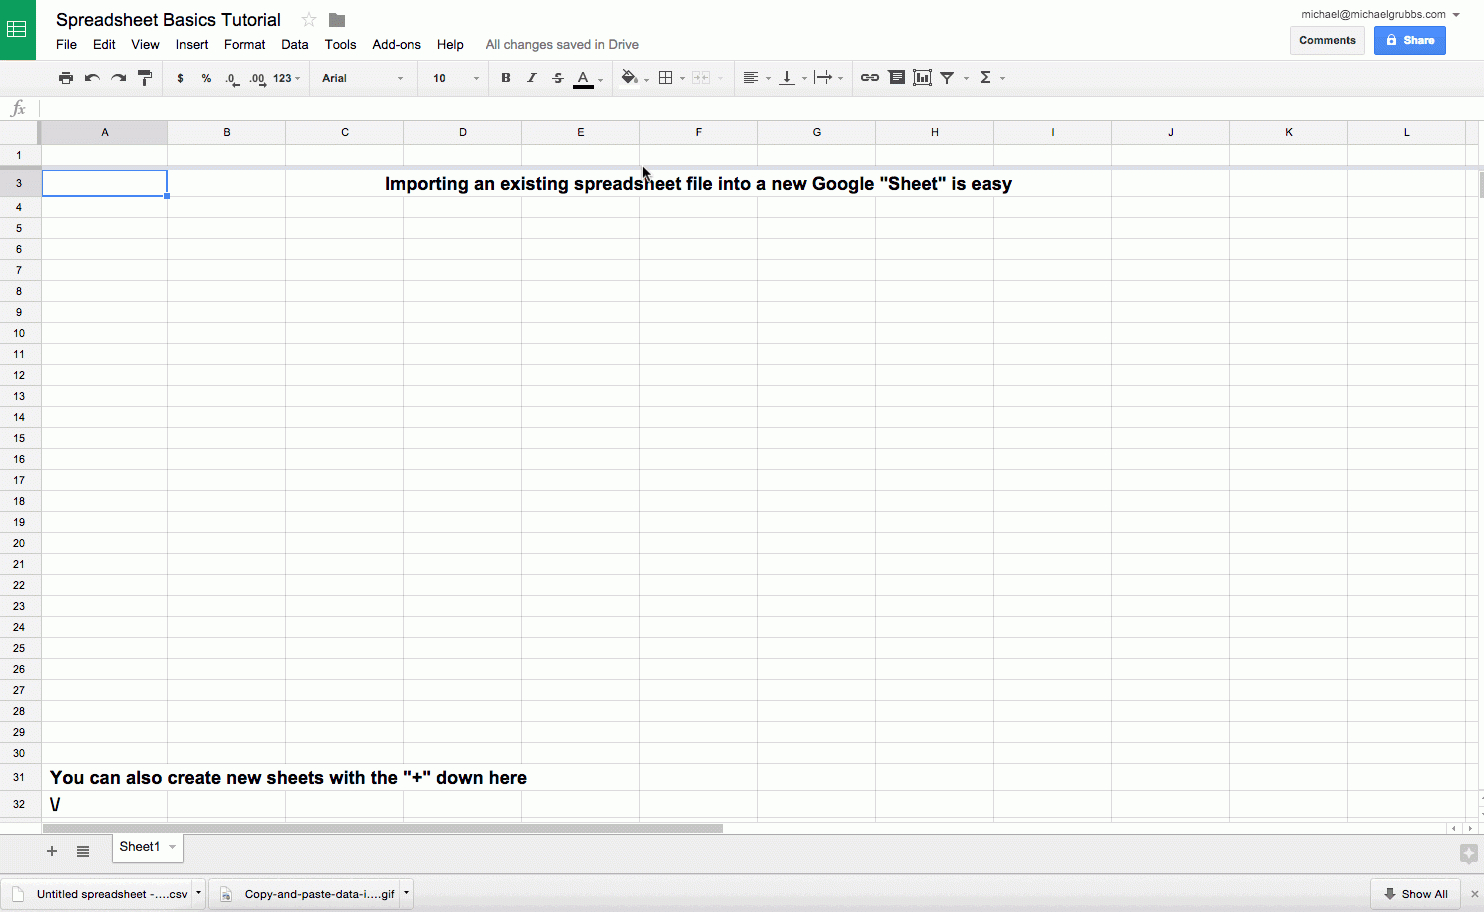 What Are The Main Uses Of A Spreadsheet In Google Sheets 101: The Beginner's Guide To Online Spreadsheets  The